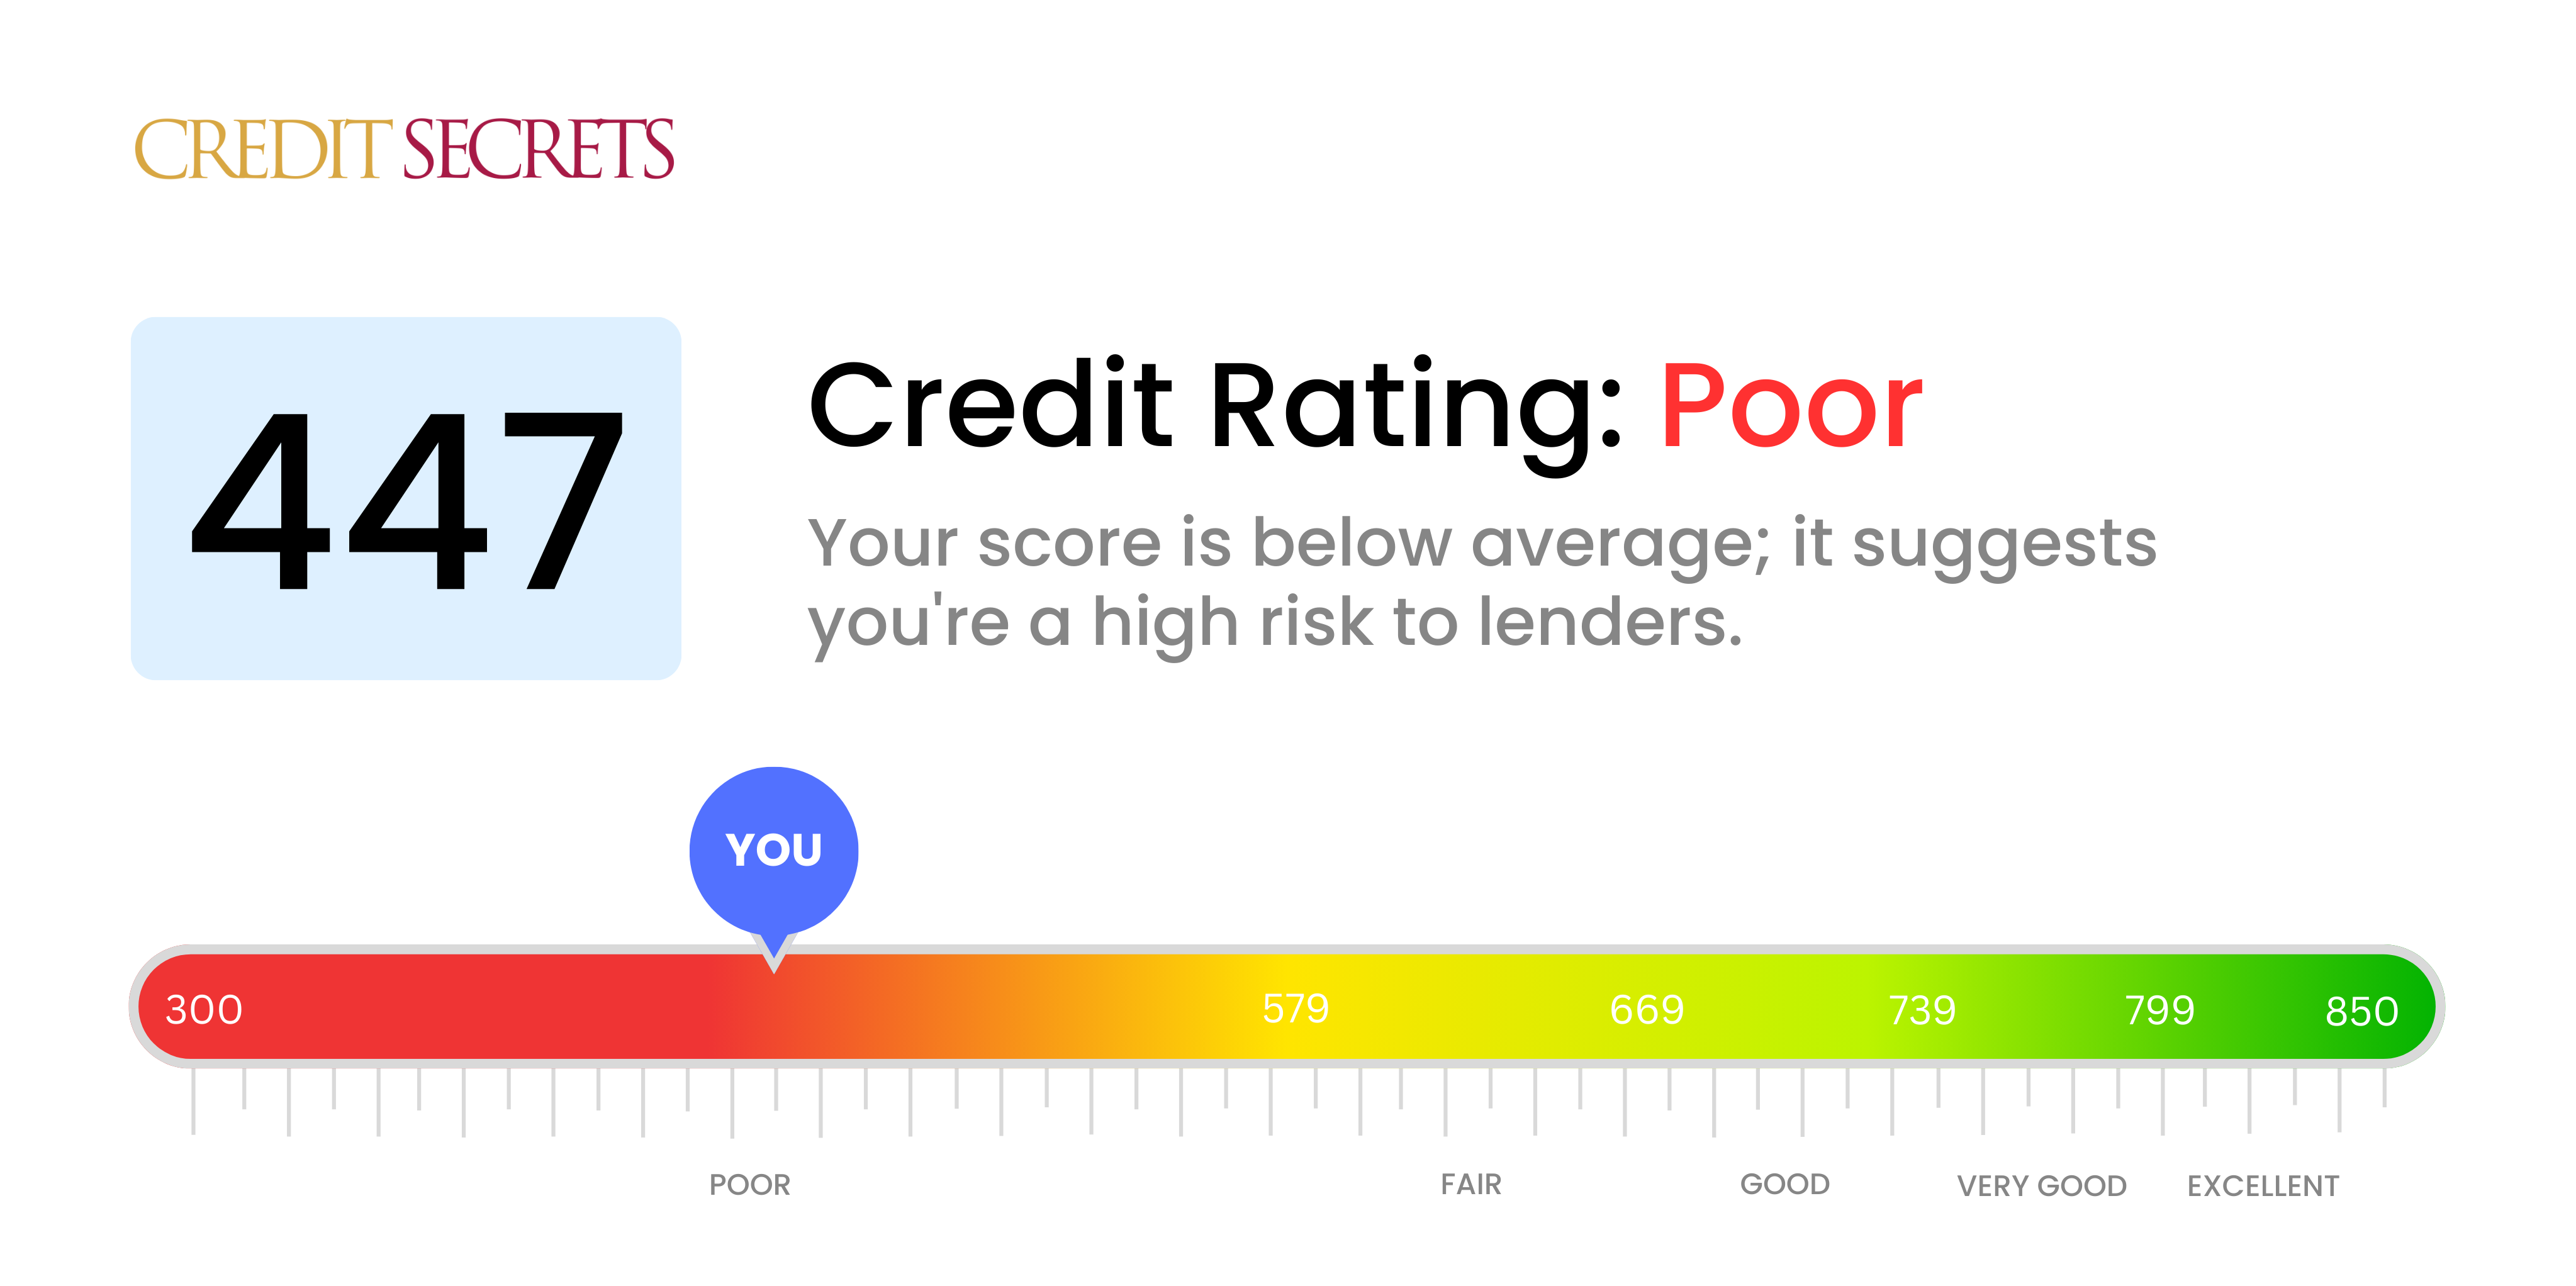 Is 447 a good credit score?